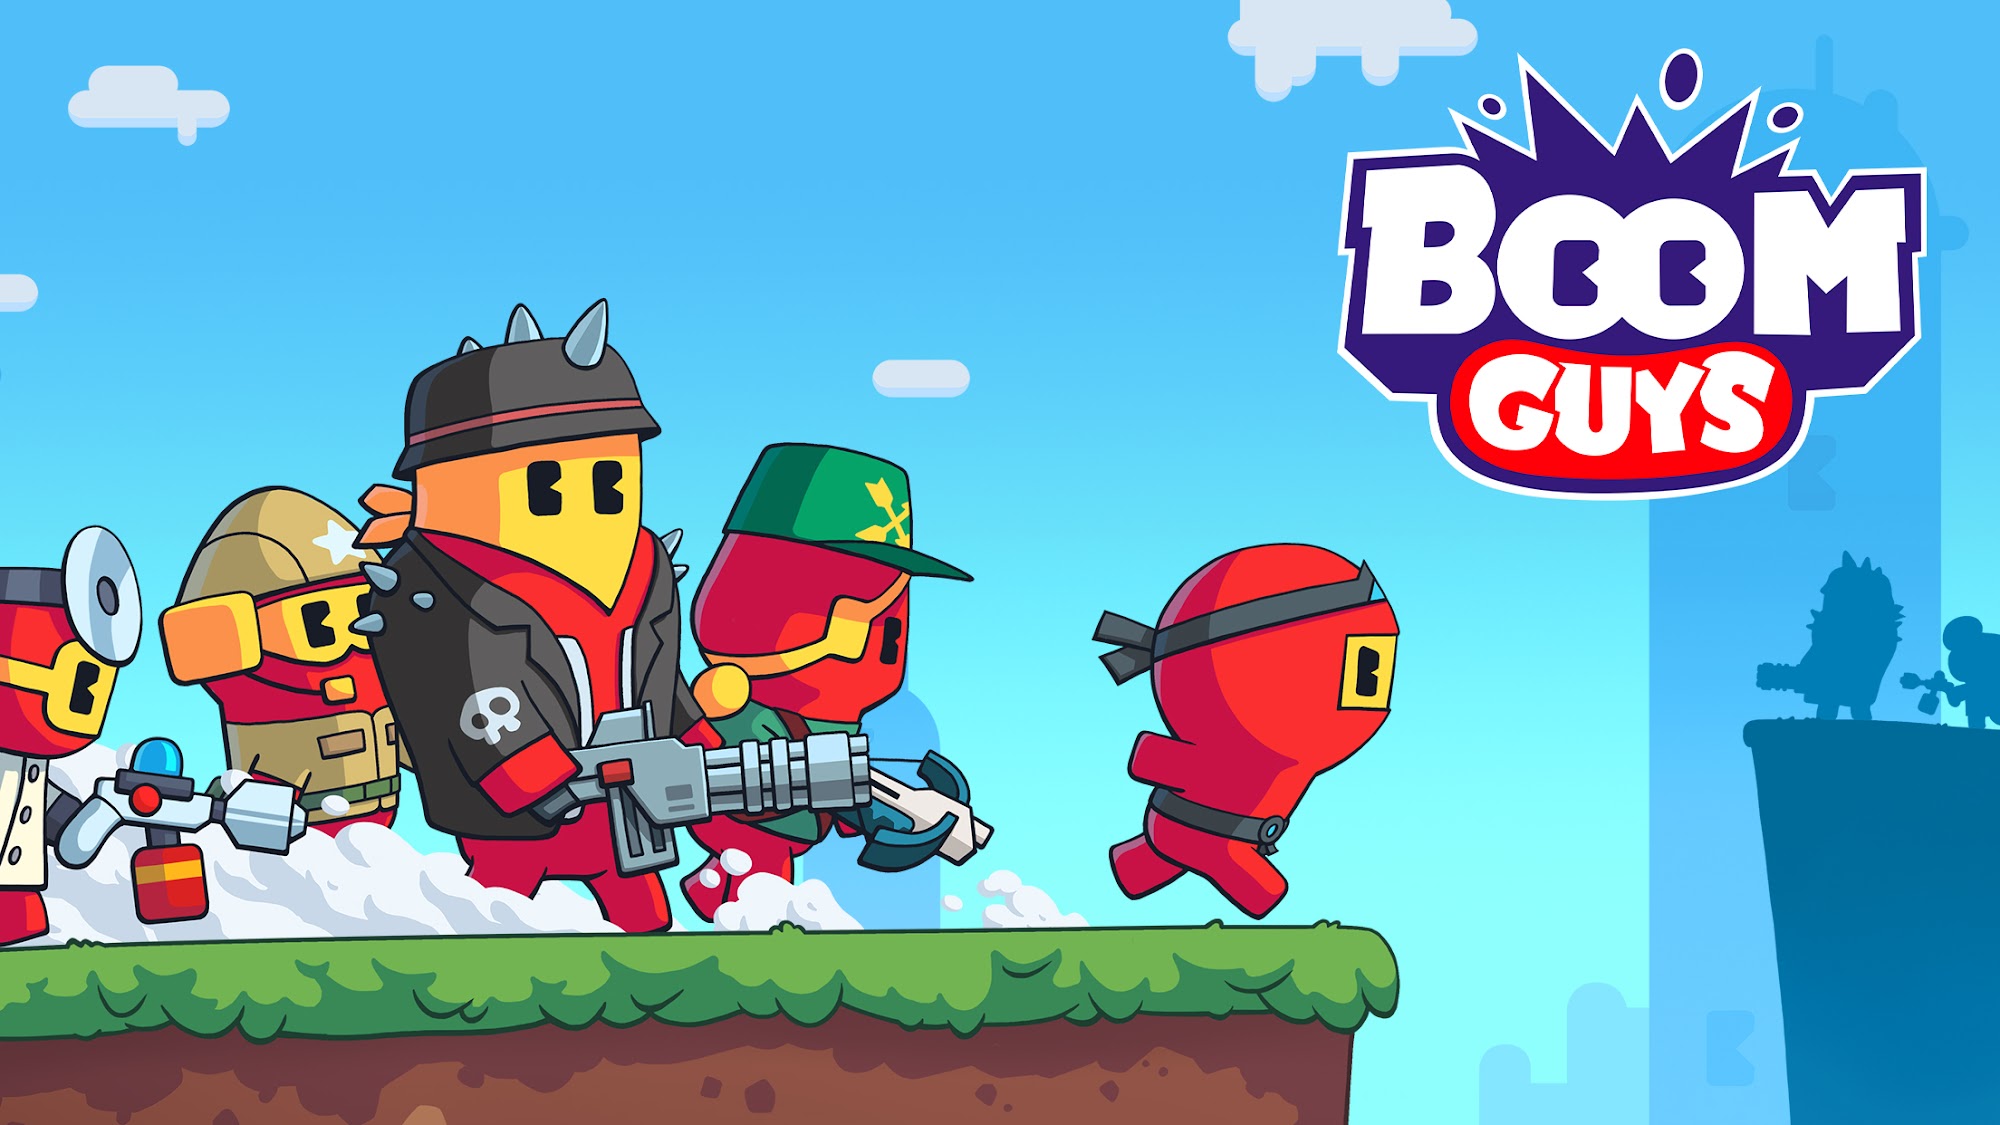 Full version of Android PvP game apk BOOM GUYS Top online PVP brawl for tablet and phone.